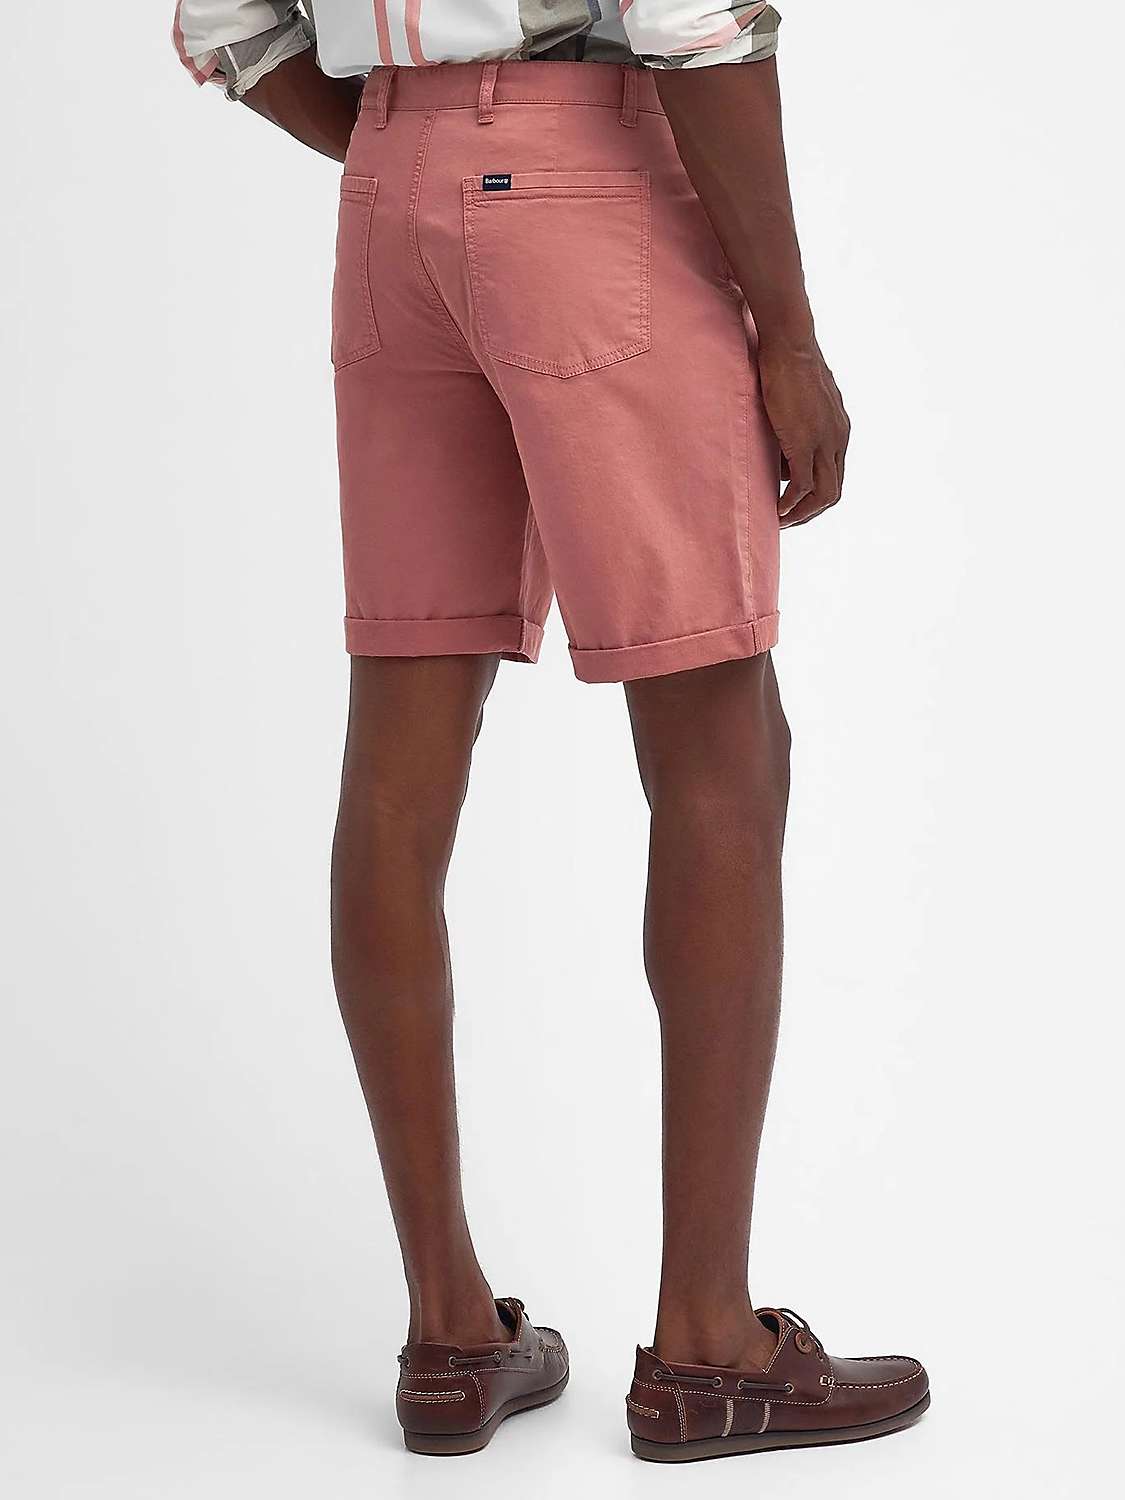 Buy Barbour Overdyed Twill Shorts, Pink Online at johnlewis.com